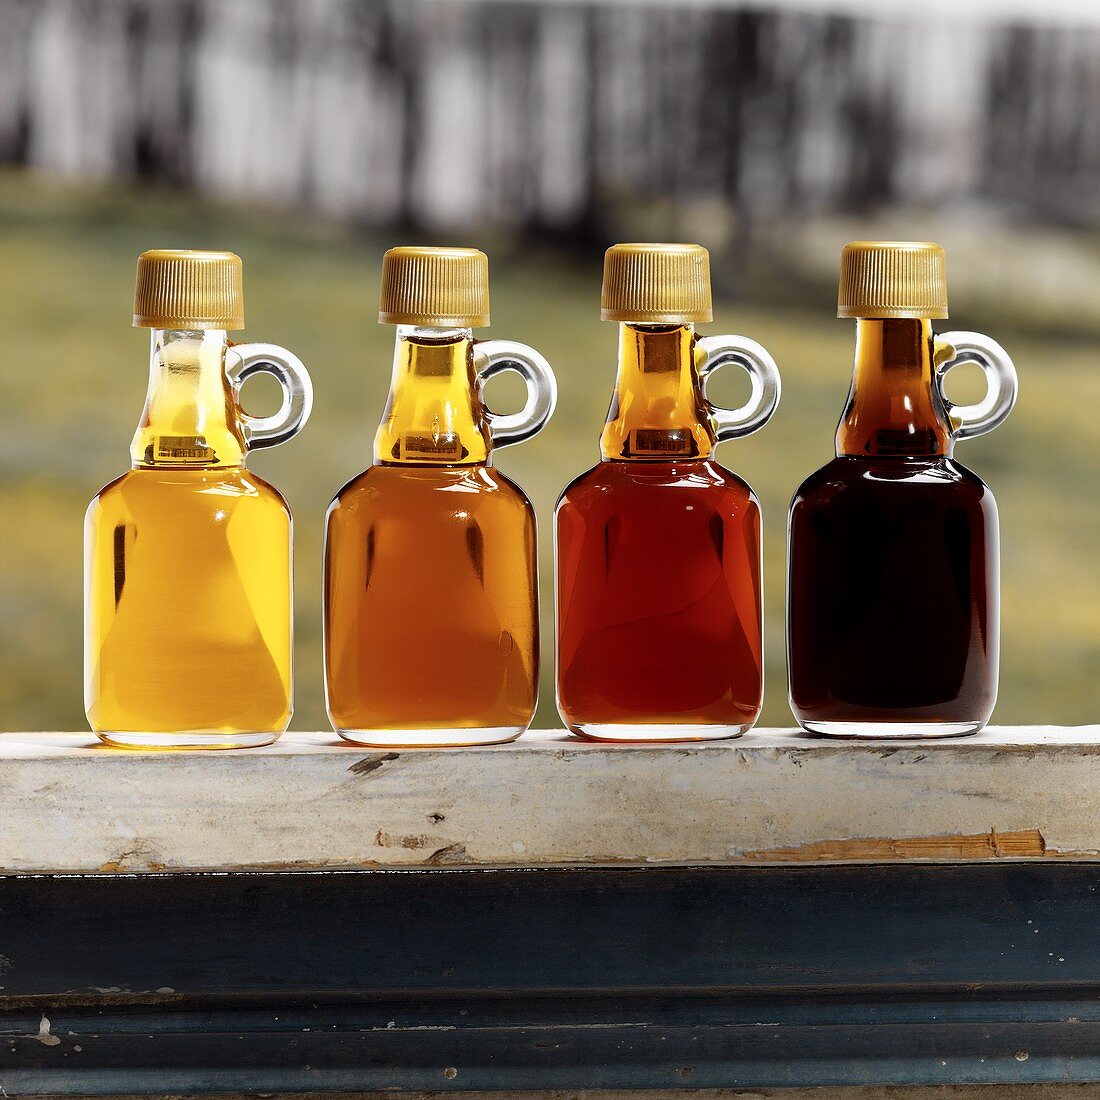 Assorted Grades of Maple Syrup in Glass Bottles in Window